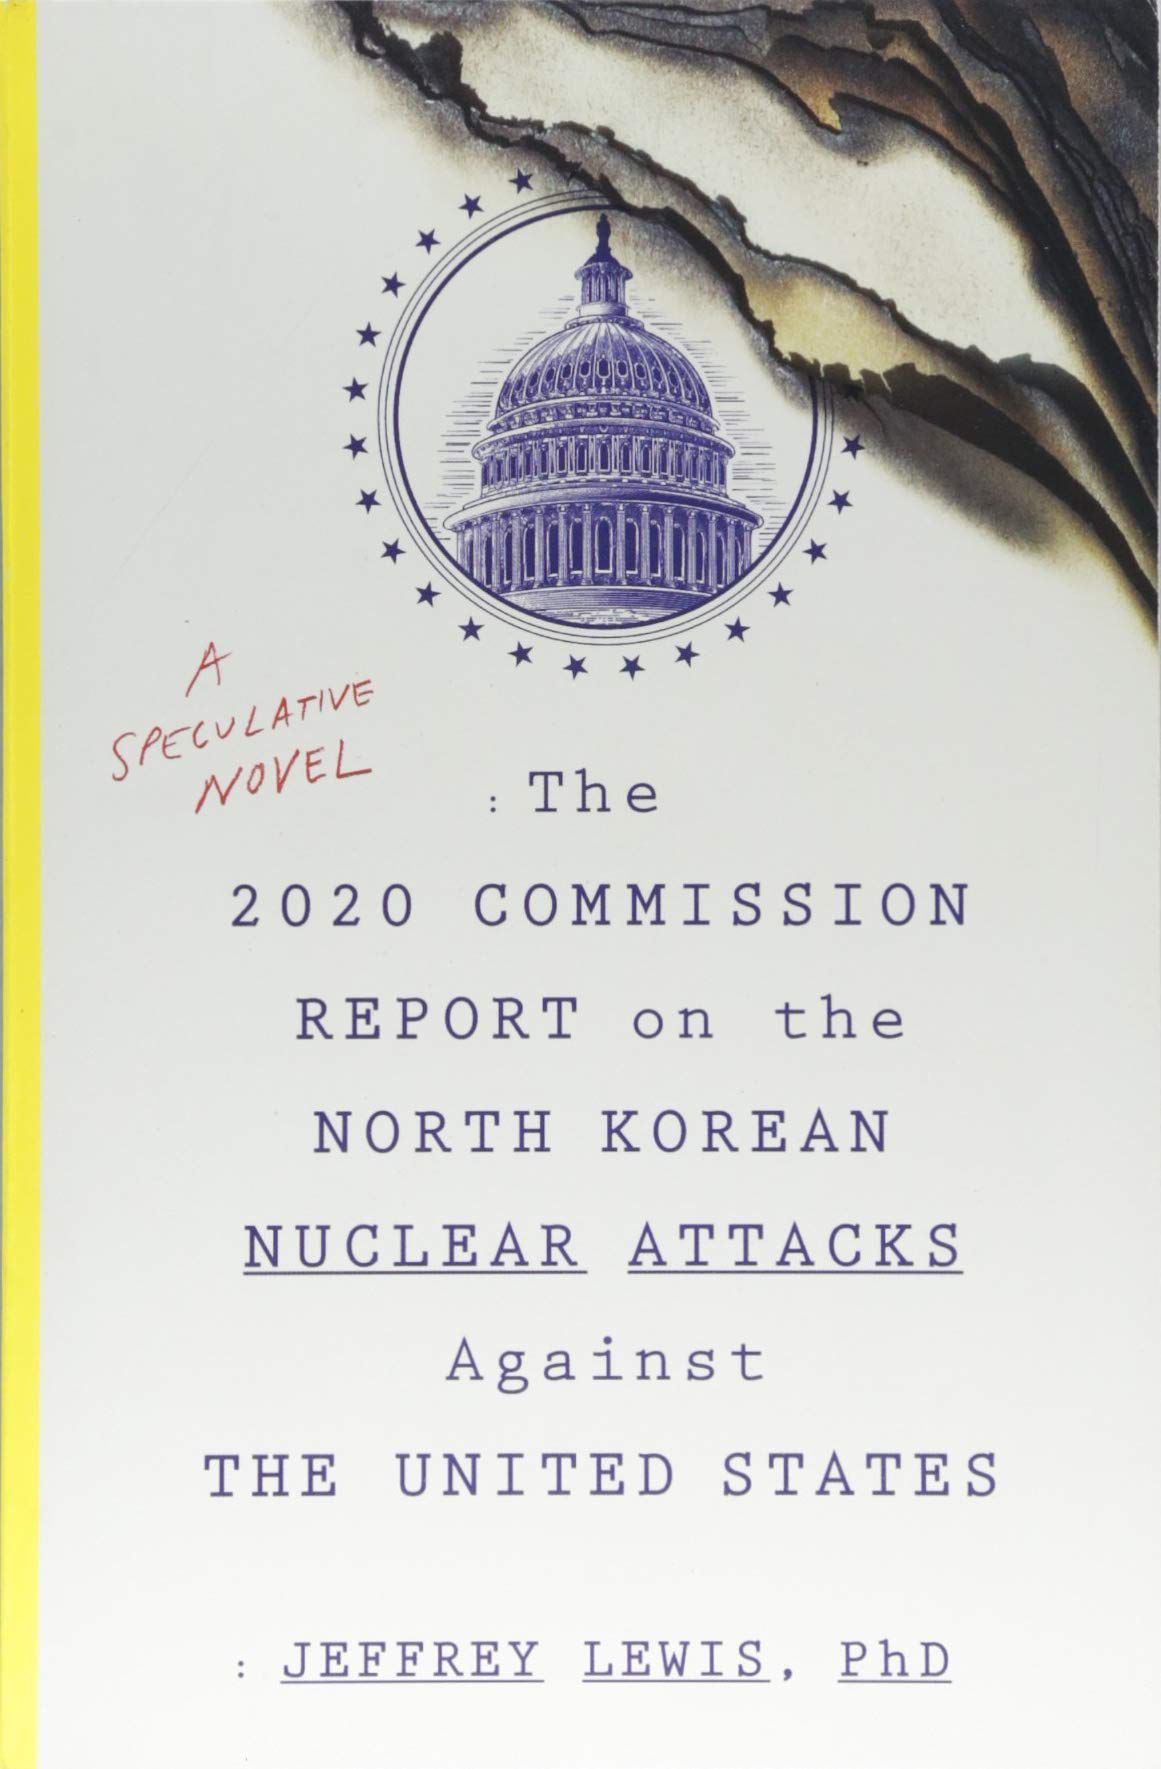 Jeffrey Lewis: 2020 Commission Report on the North Korean Nuclear Attacks Against the United States (2018, Ebury Publishing)